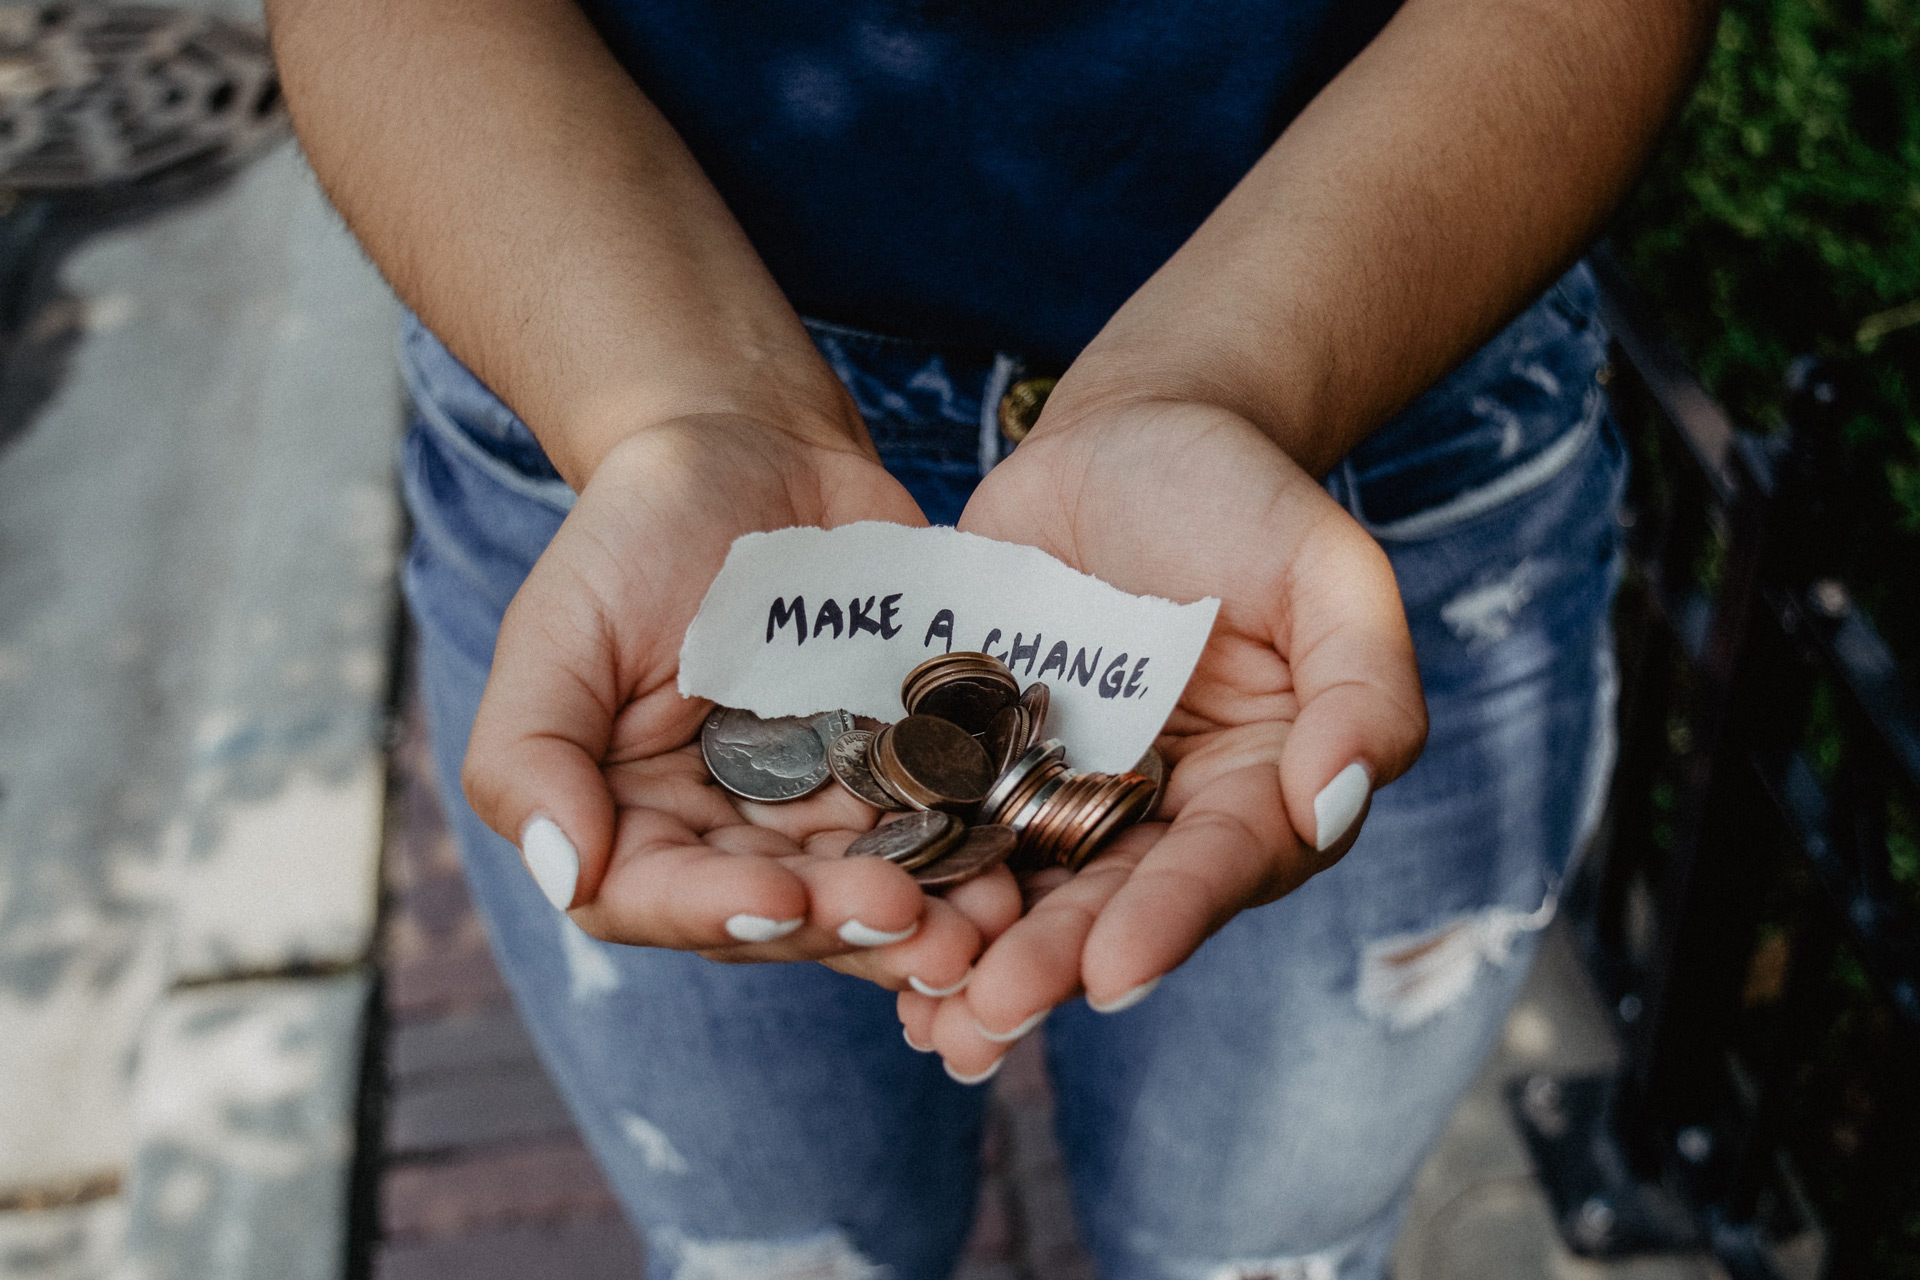 image of a person holding a "Make Change" sign